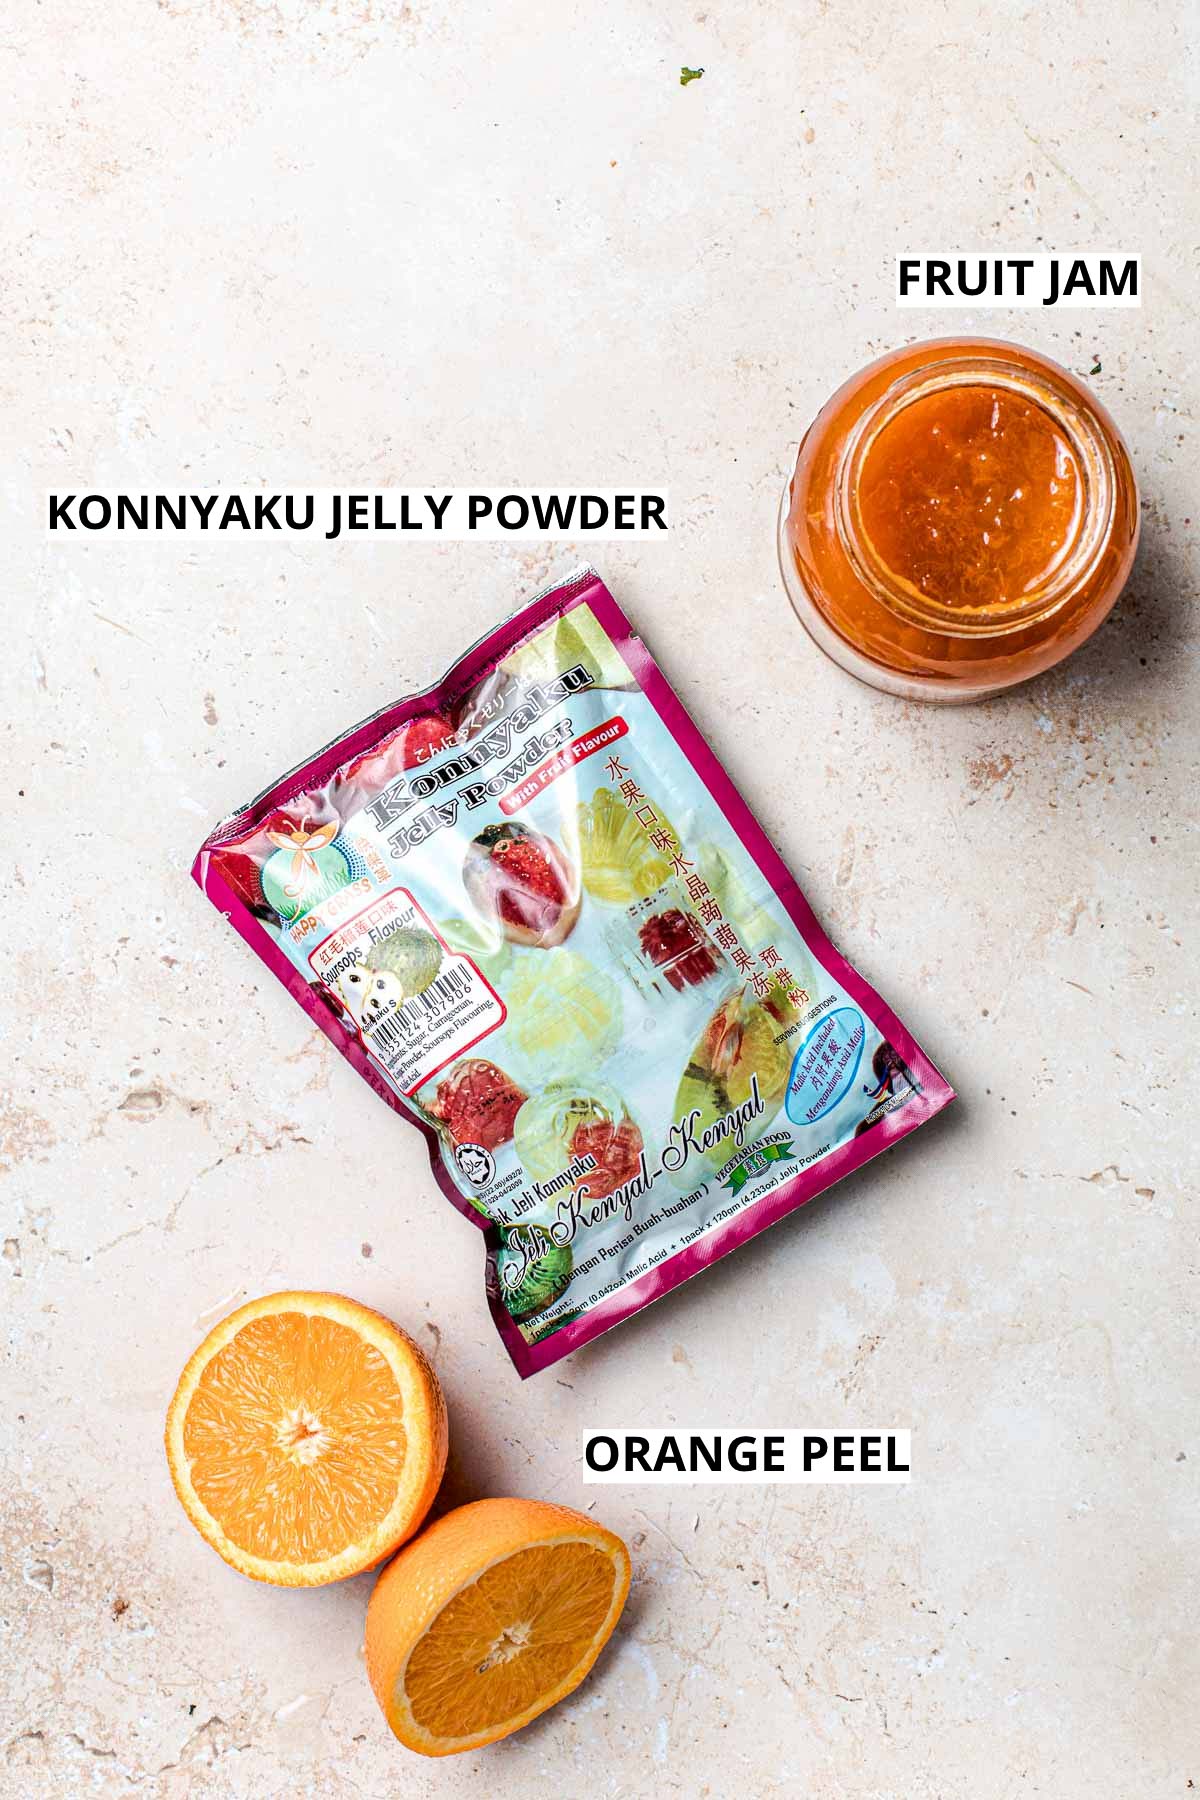 All the ingredients needed to make konnyaku jelly from scratch.